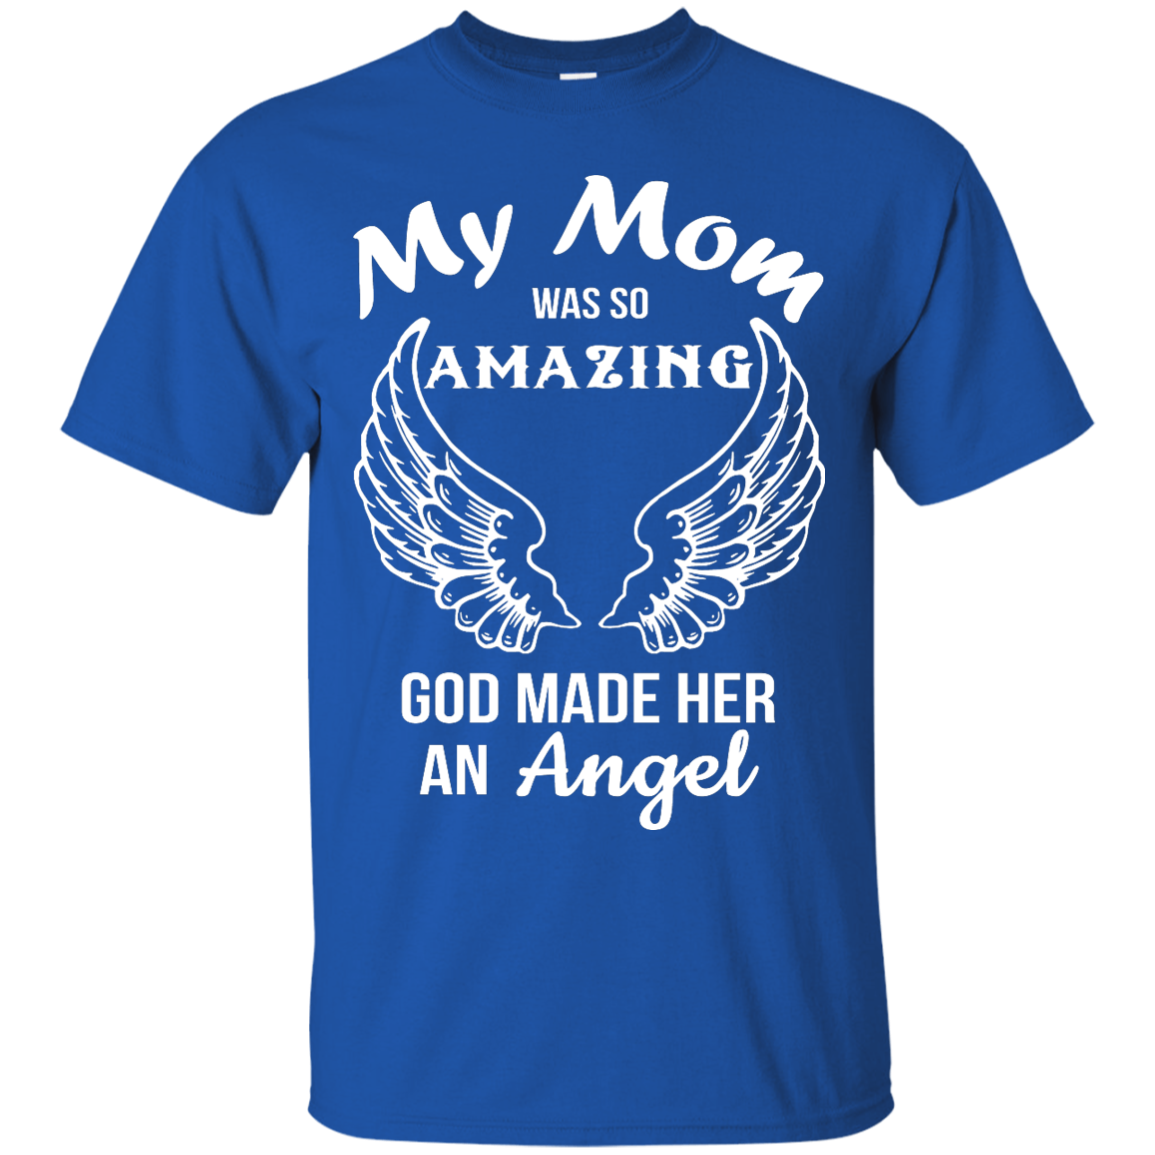 My Mom was so amazing god made her an Angel shirt